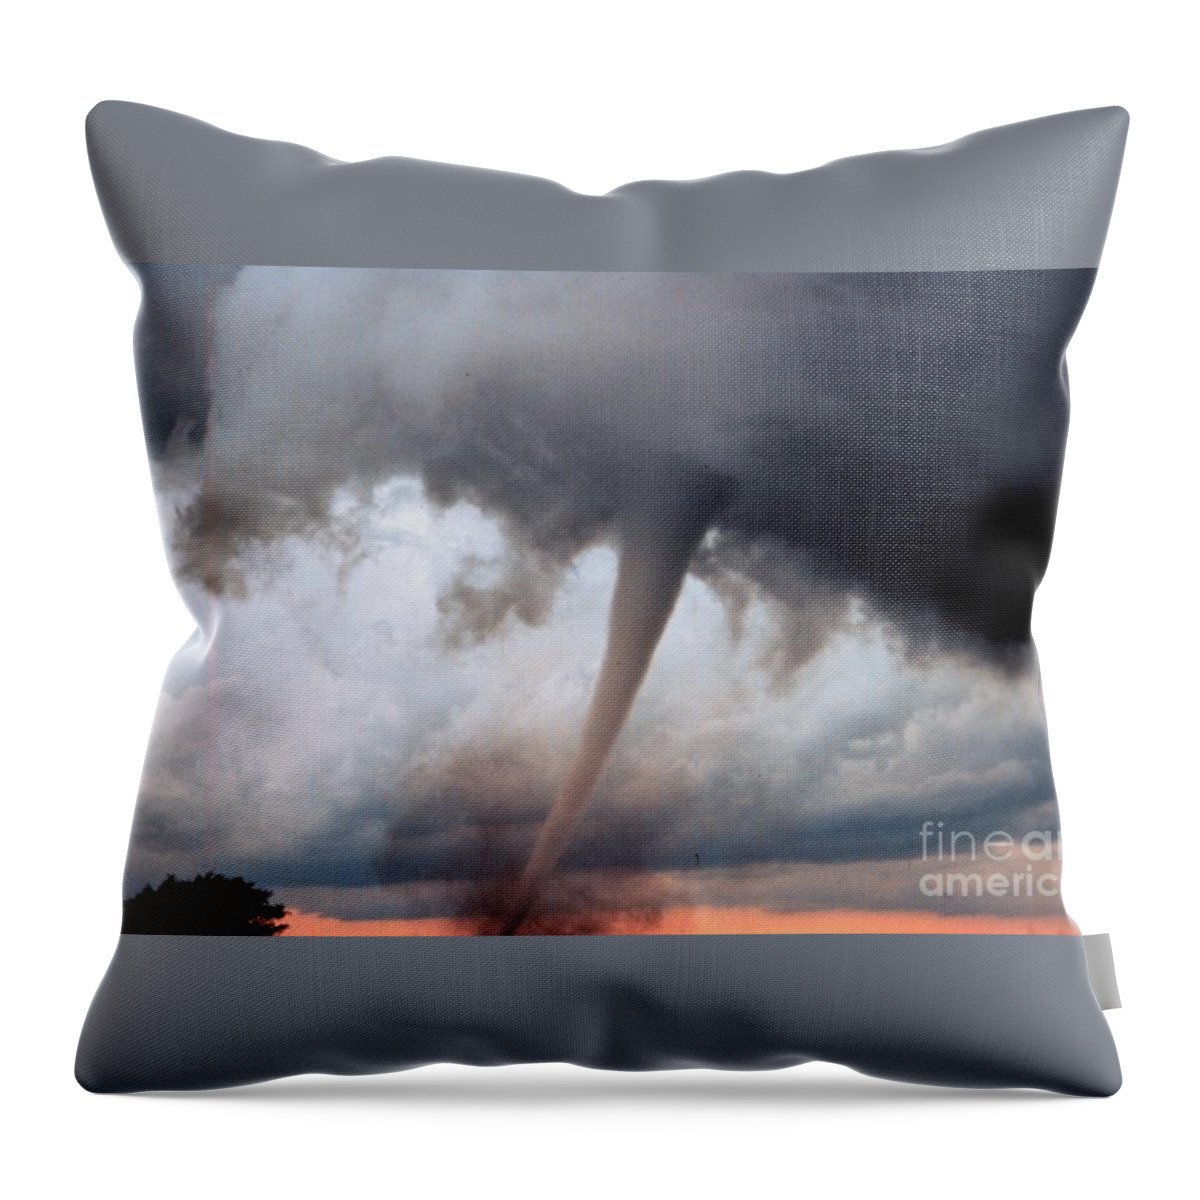 Science Throw Pillow featuring the photograph Occluded Mesocyclone Tornado Sequence 3 by Science Source